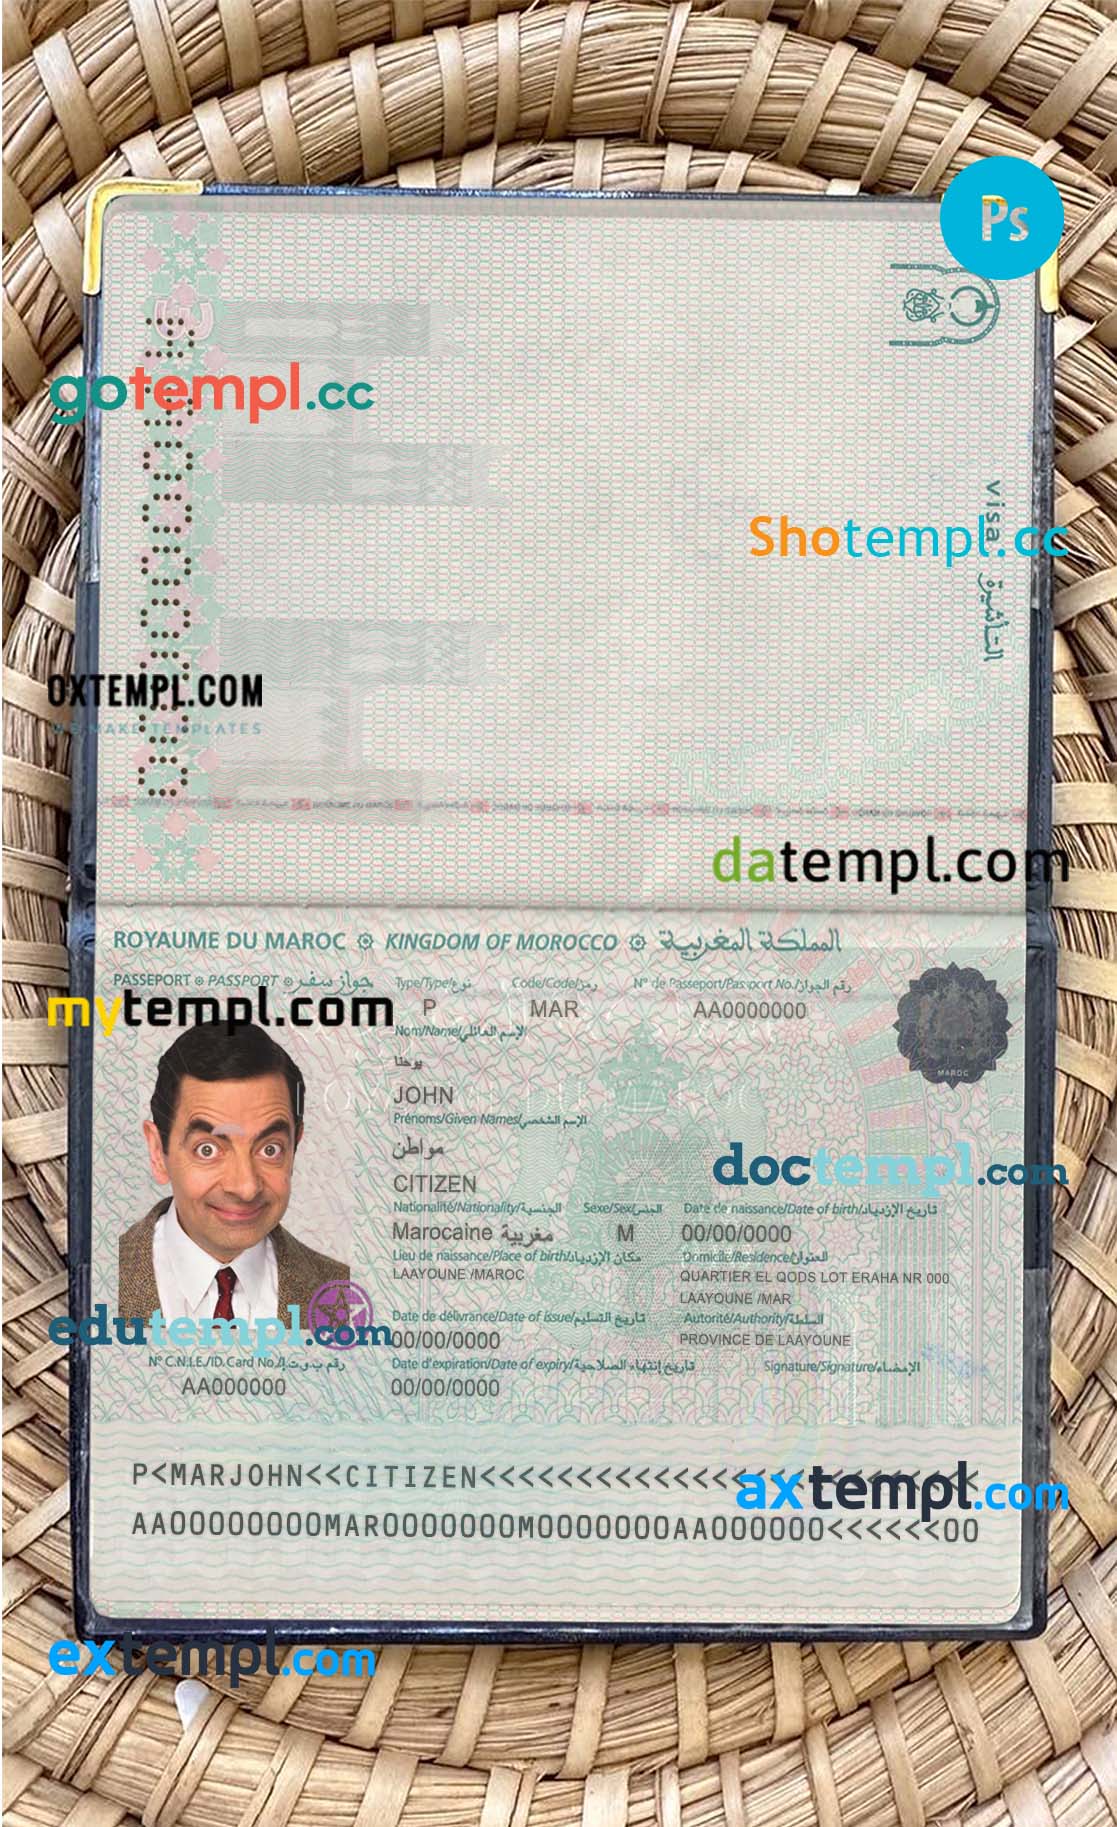 Kazakhstan driving license PSD files, scan look and photographed image, 2 in 1